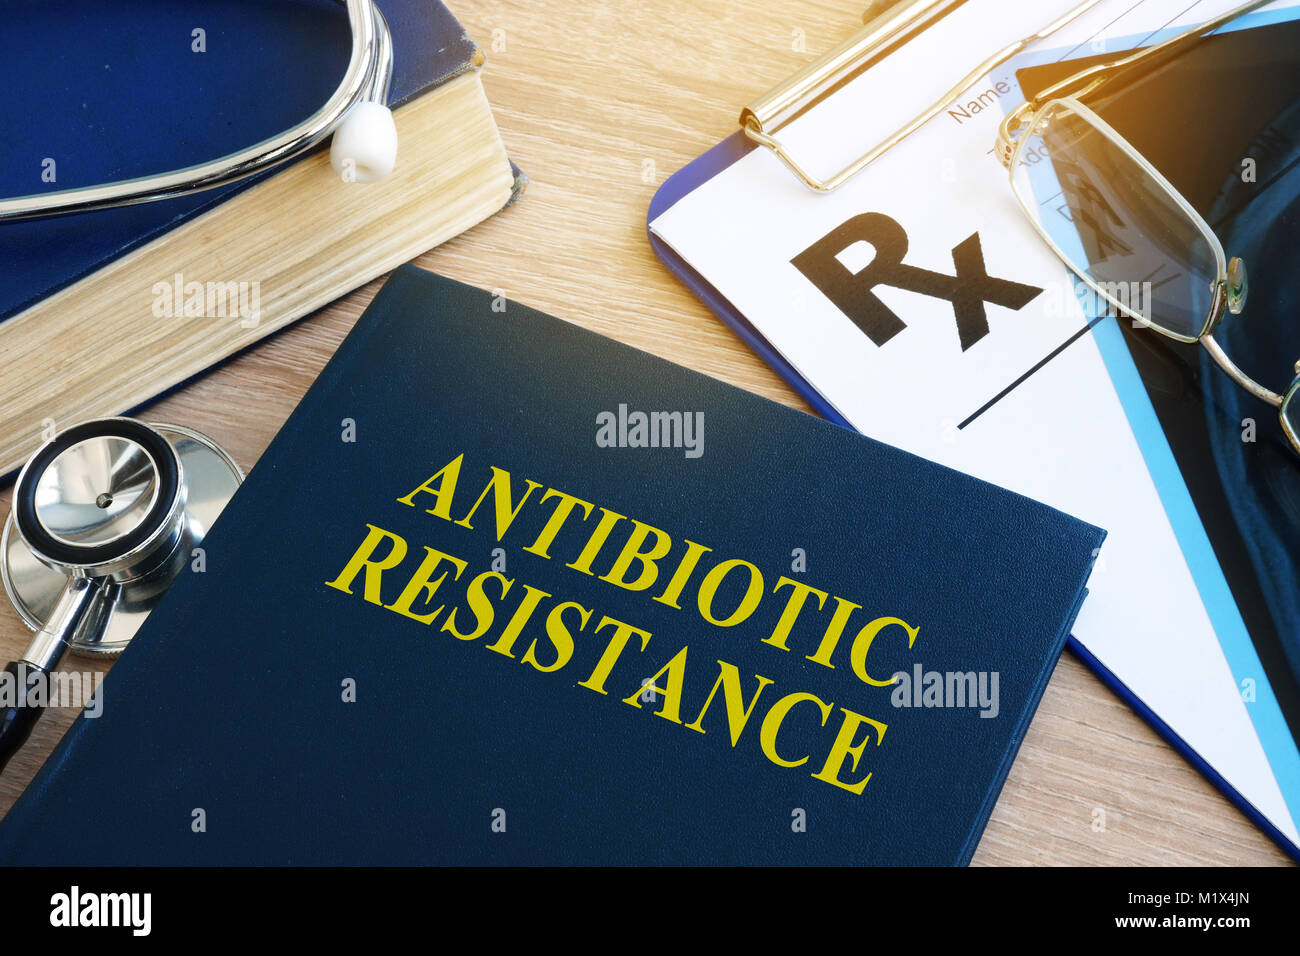 Book with title Antibiotic resistance in a hospital. Stock Photo